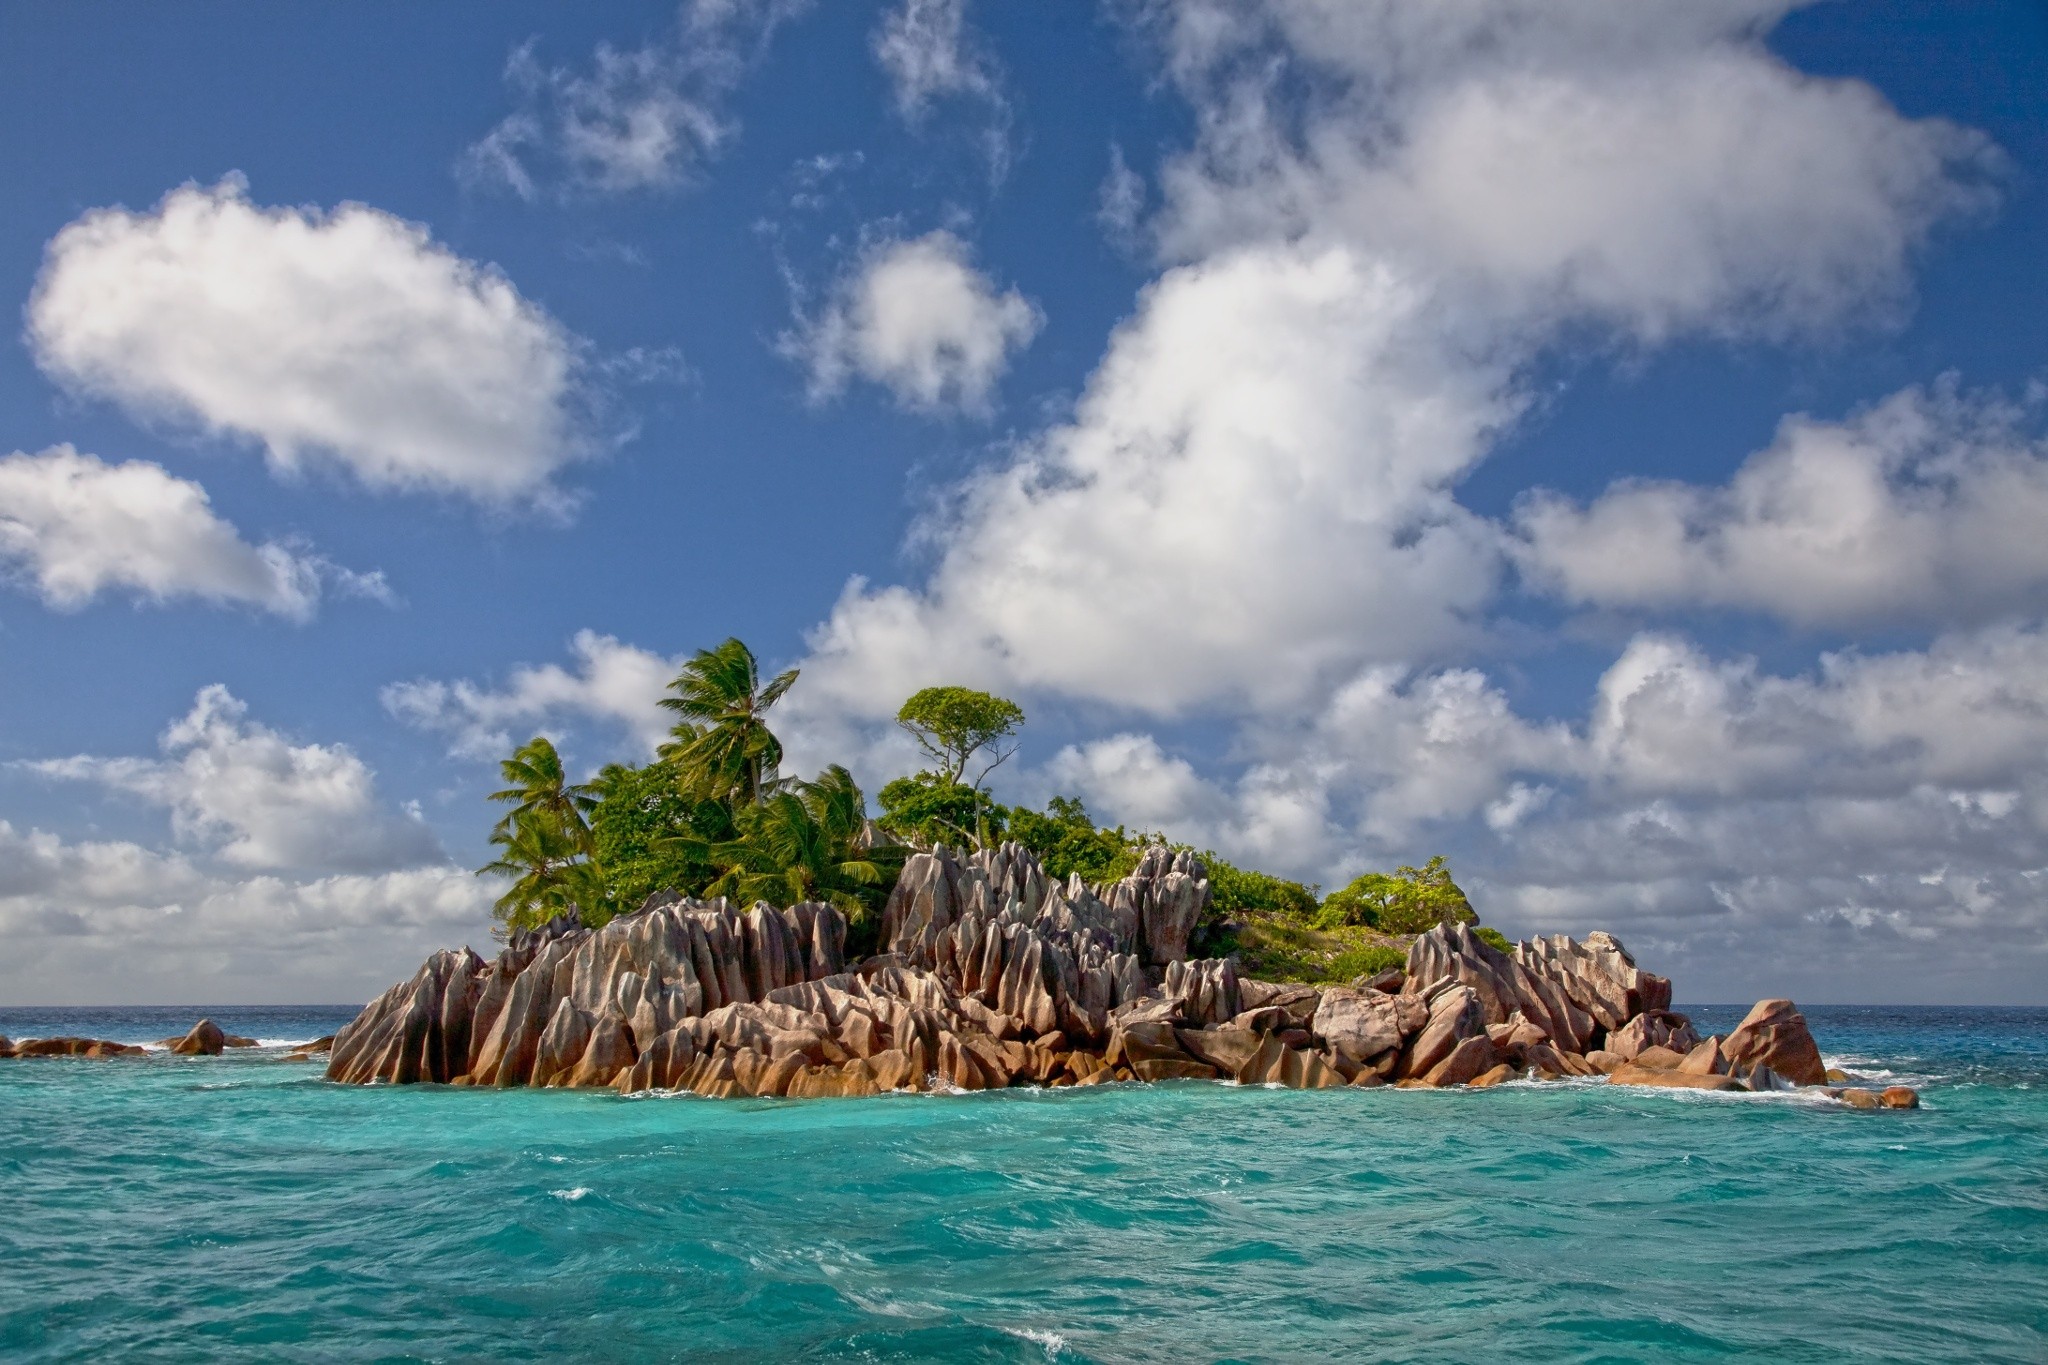 General 2048x1365 Seychelles island sea tropical beach turquoise clouds exotic summer vacation nature landscape